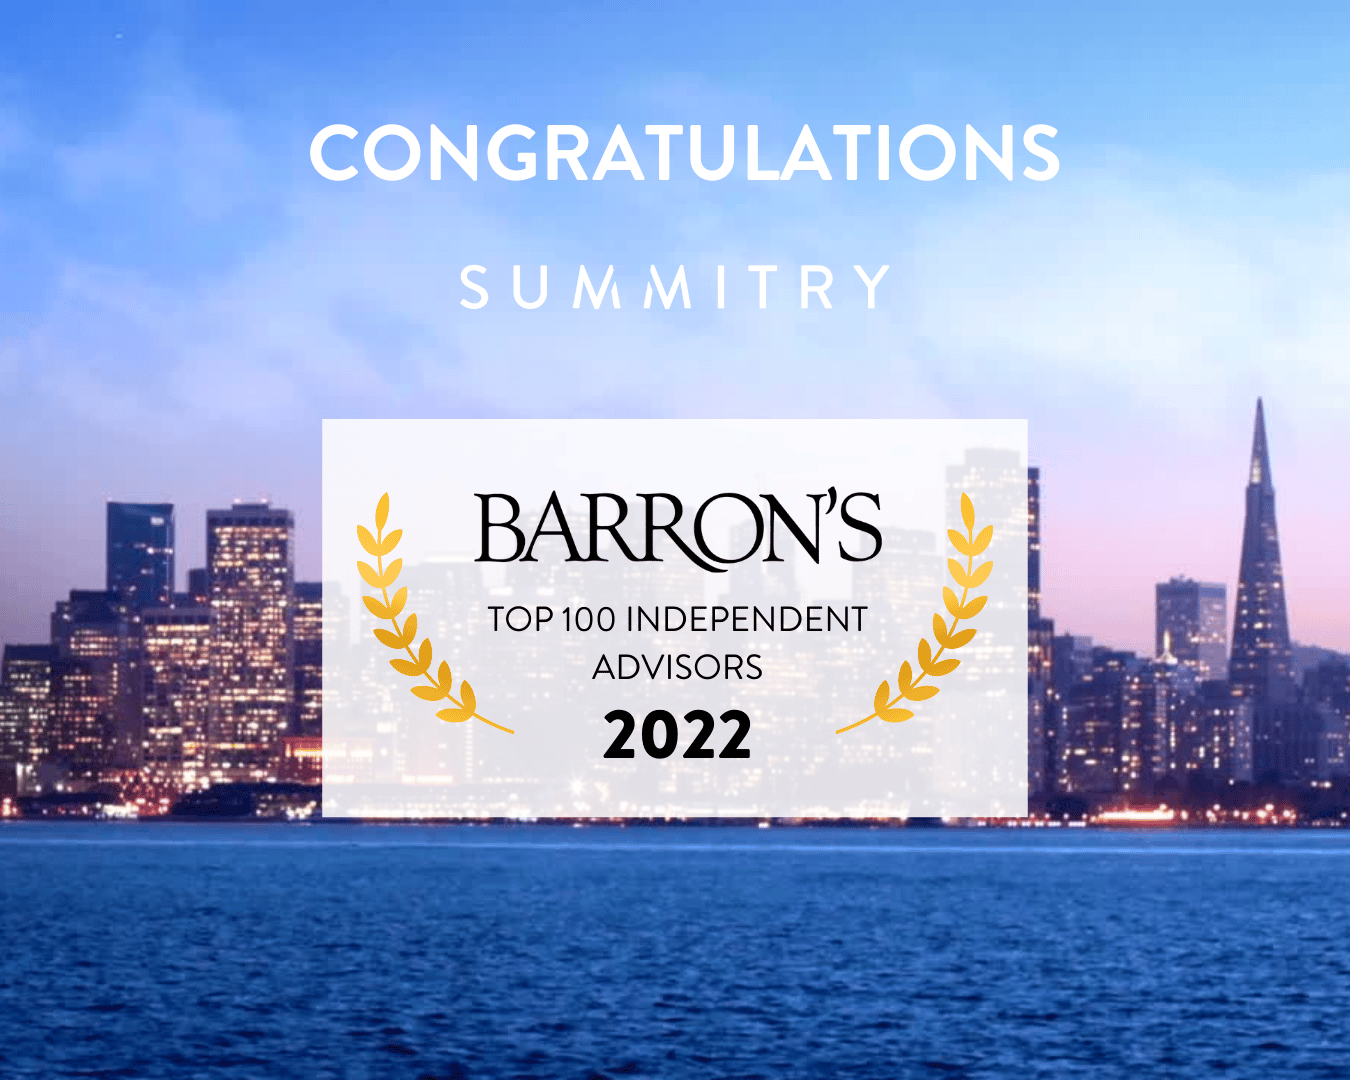 Barron's Top 100 Independent Financial Advisors for 2022 Summitry